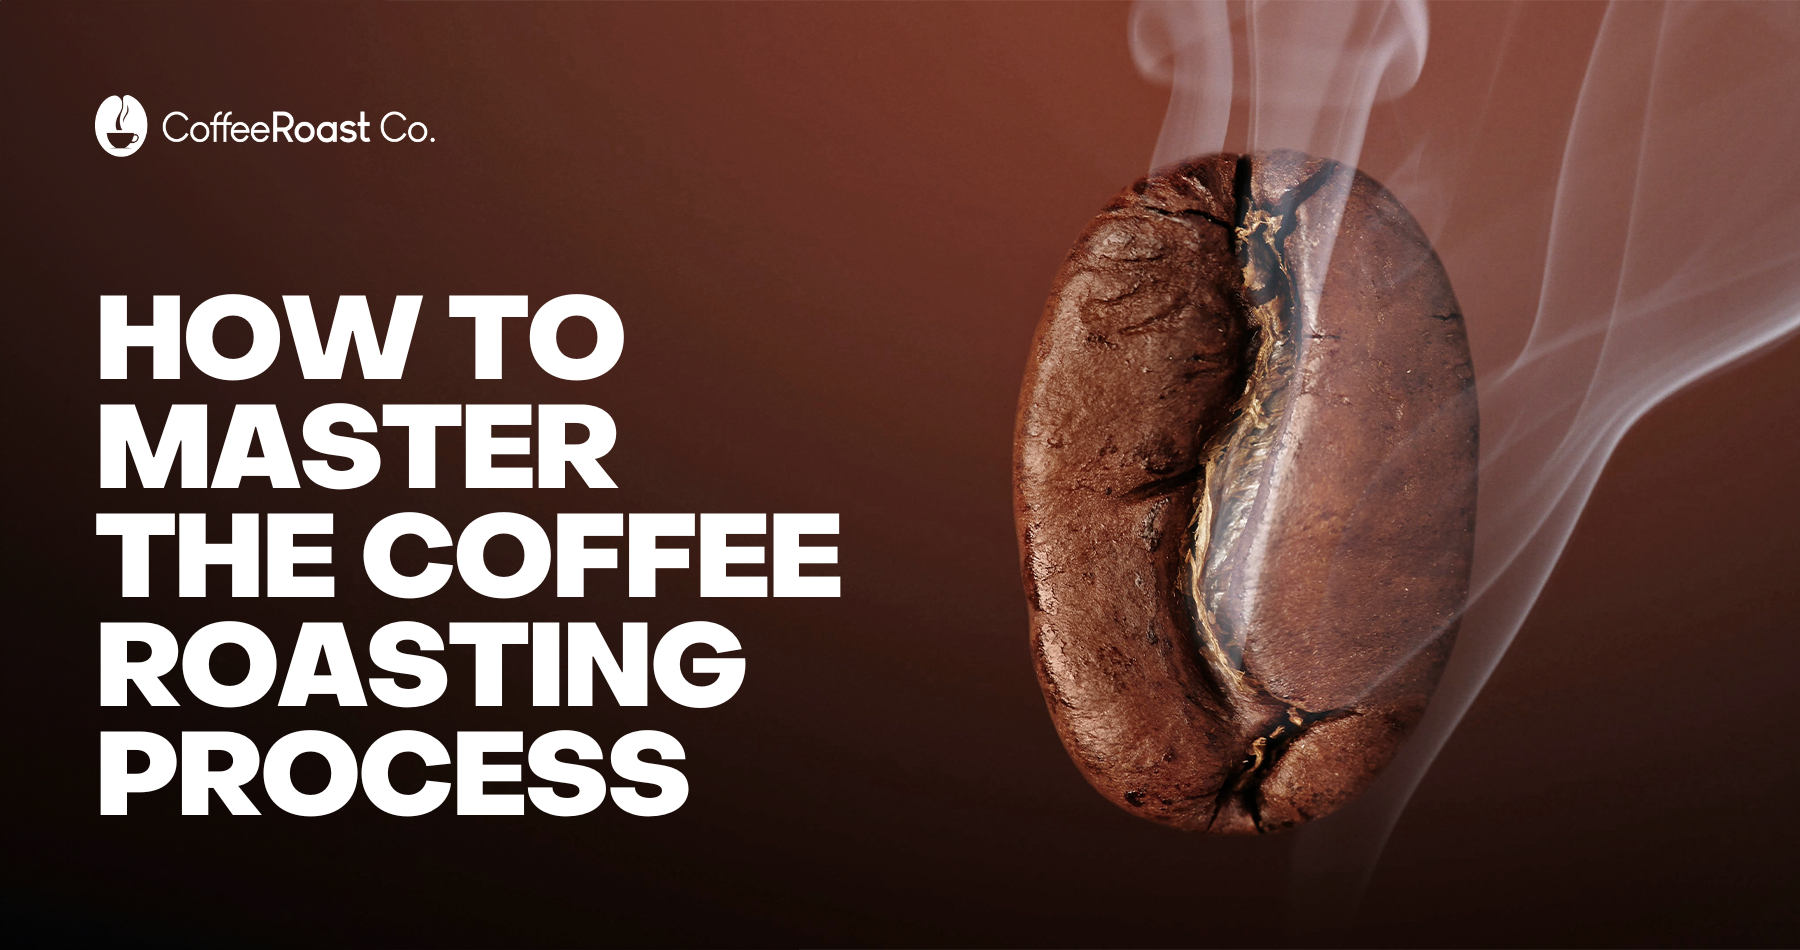 How to Master the Coffee Roasting Process